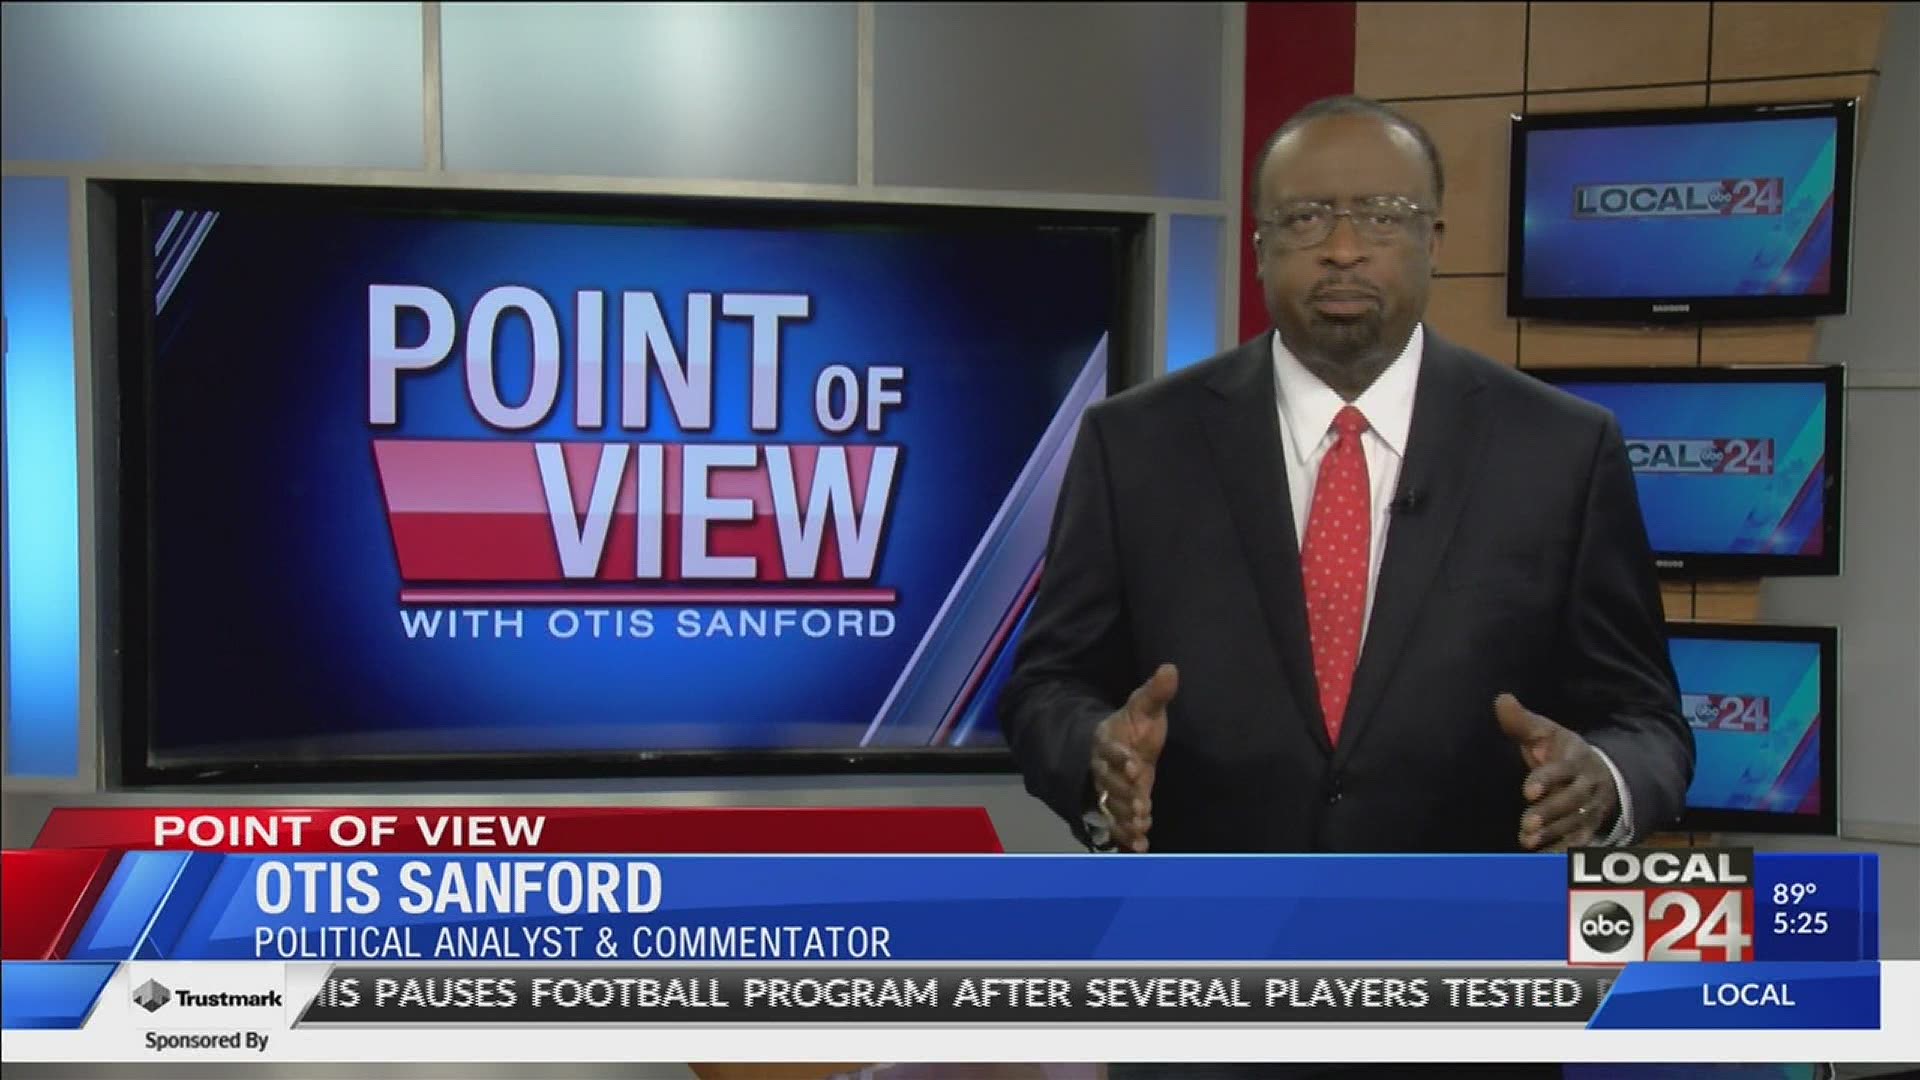 Local 24 News political analyst and commentator Otis Sanford shares his point of view on remembering September 11, 2001.